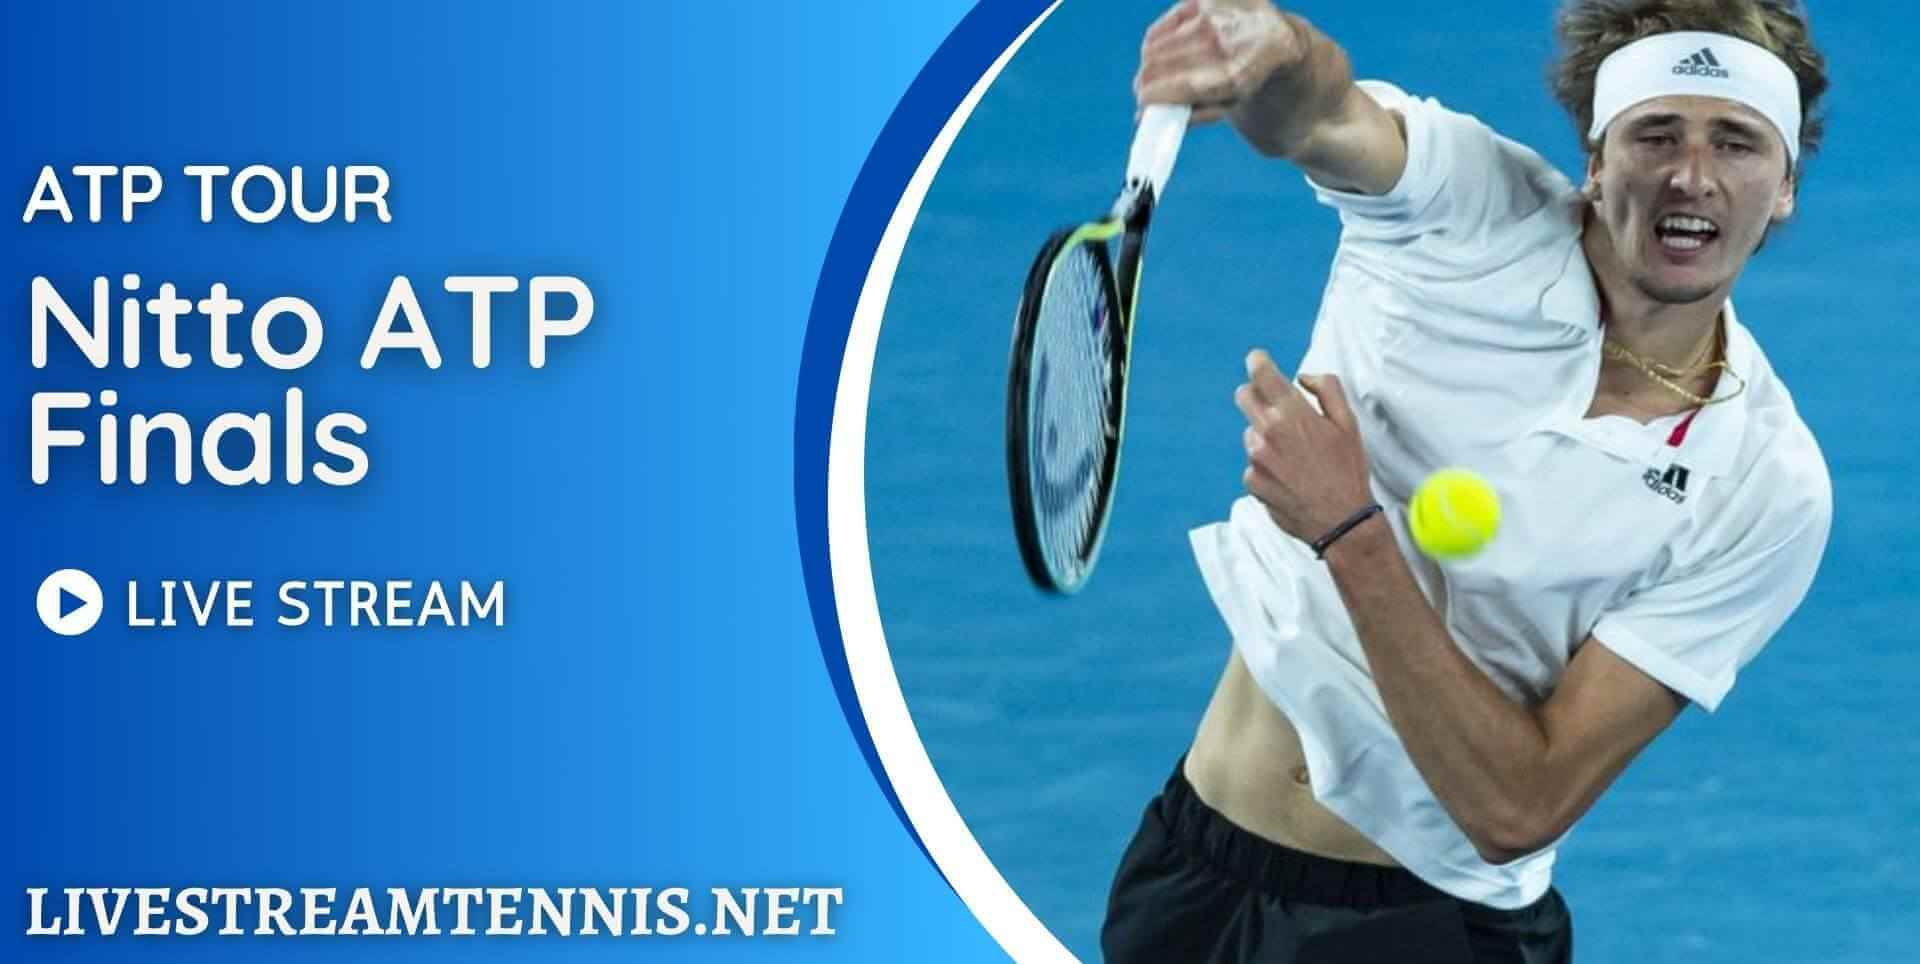 nitto-atp-finals-live-streaming